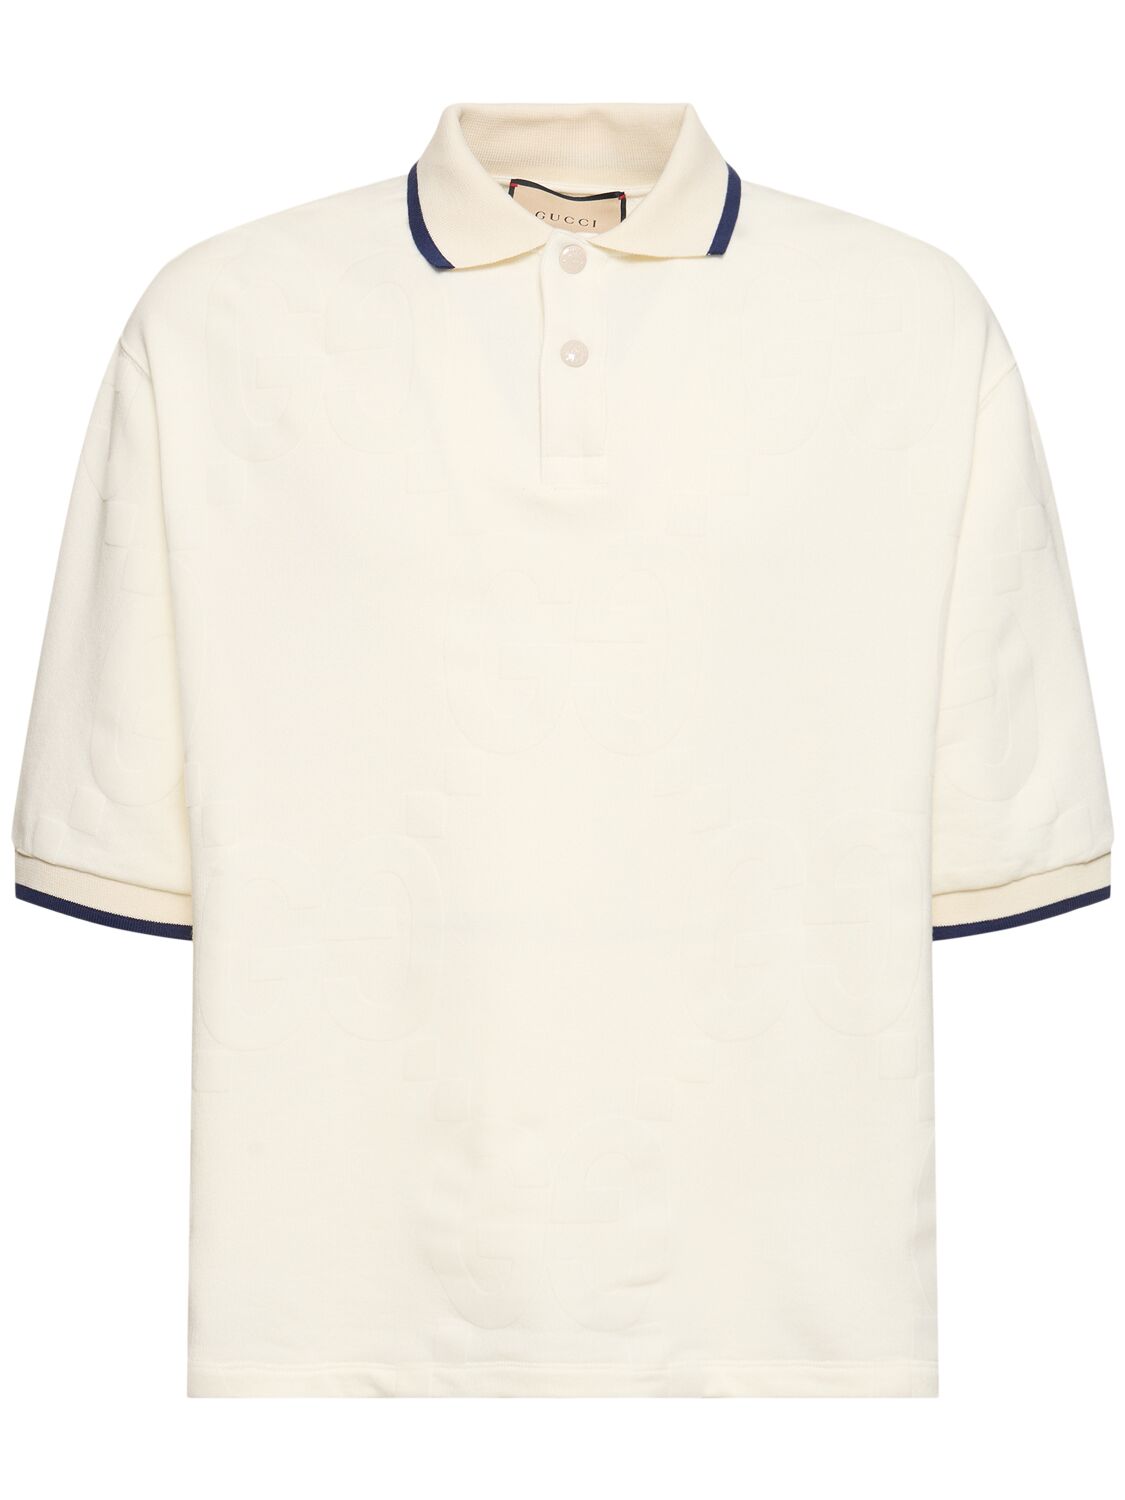 Gucci Light Felted Cotton Jersey Polo Shirt In White